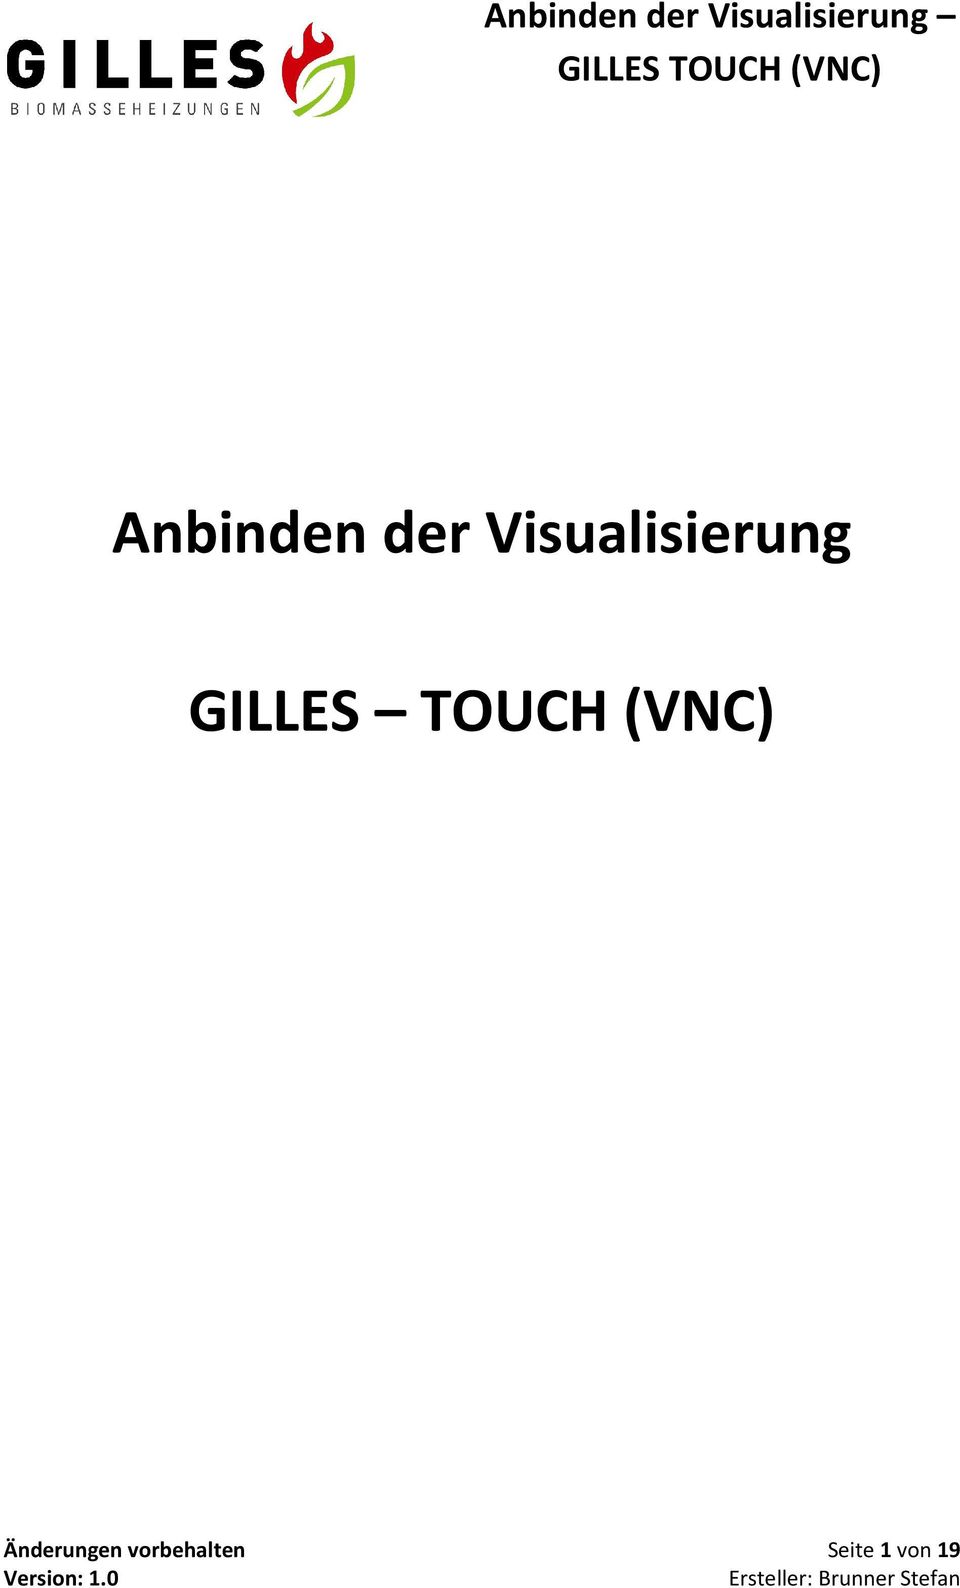 GILLES TOUCH